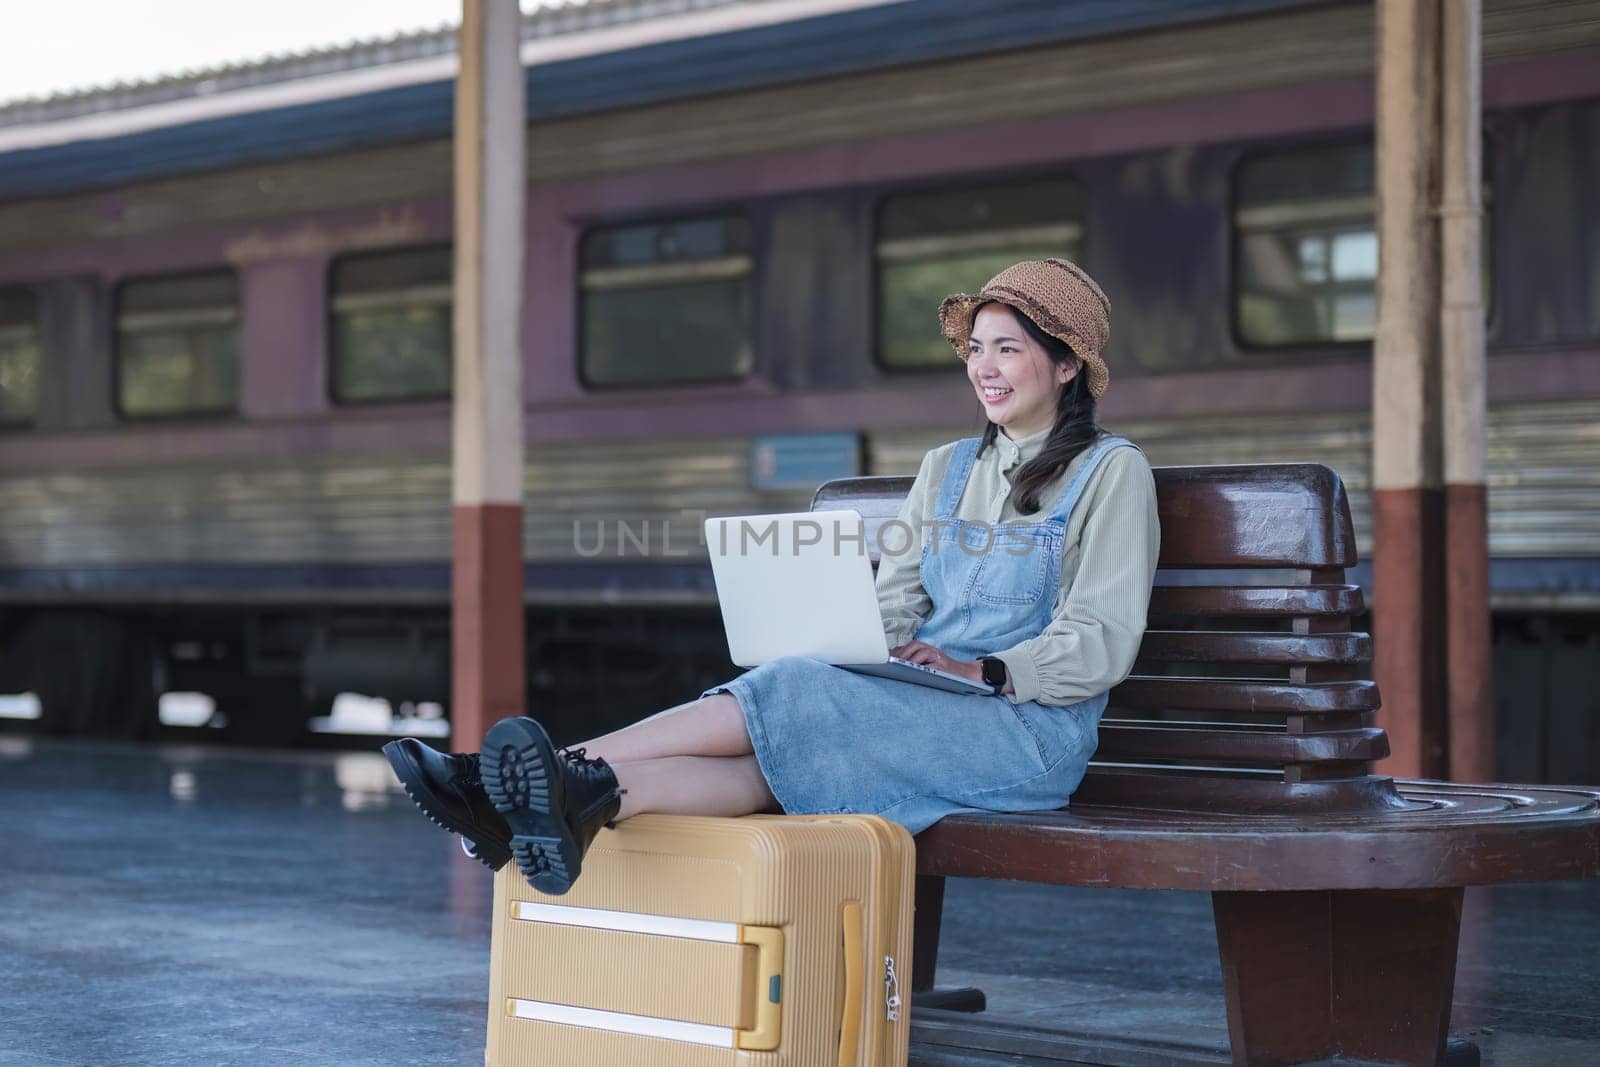 Young Asian woman in modern train station Female backpacker passenger sitting on a bench using a laptop